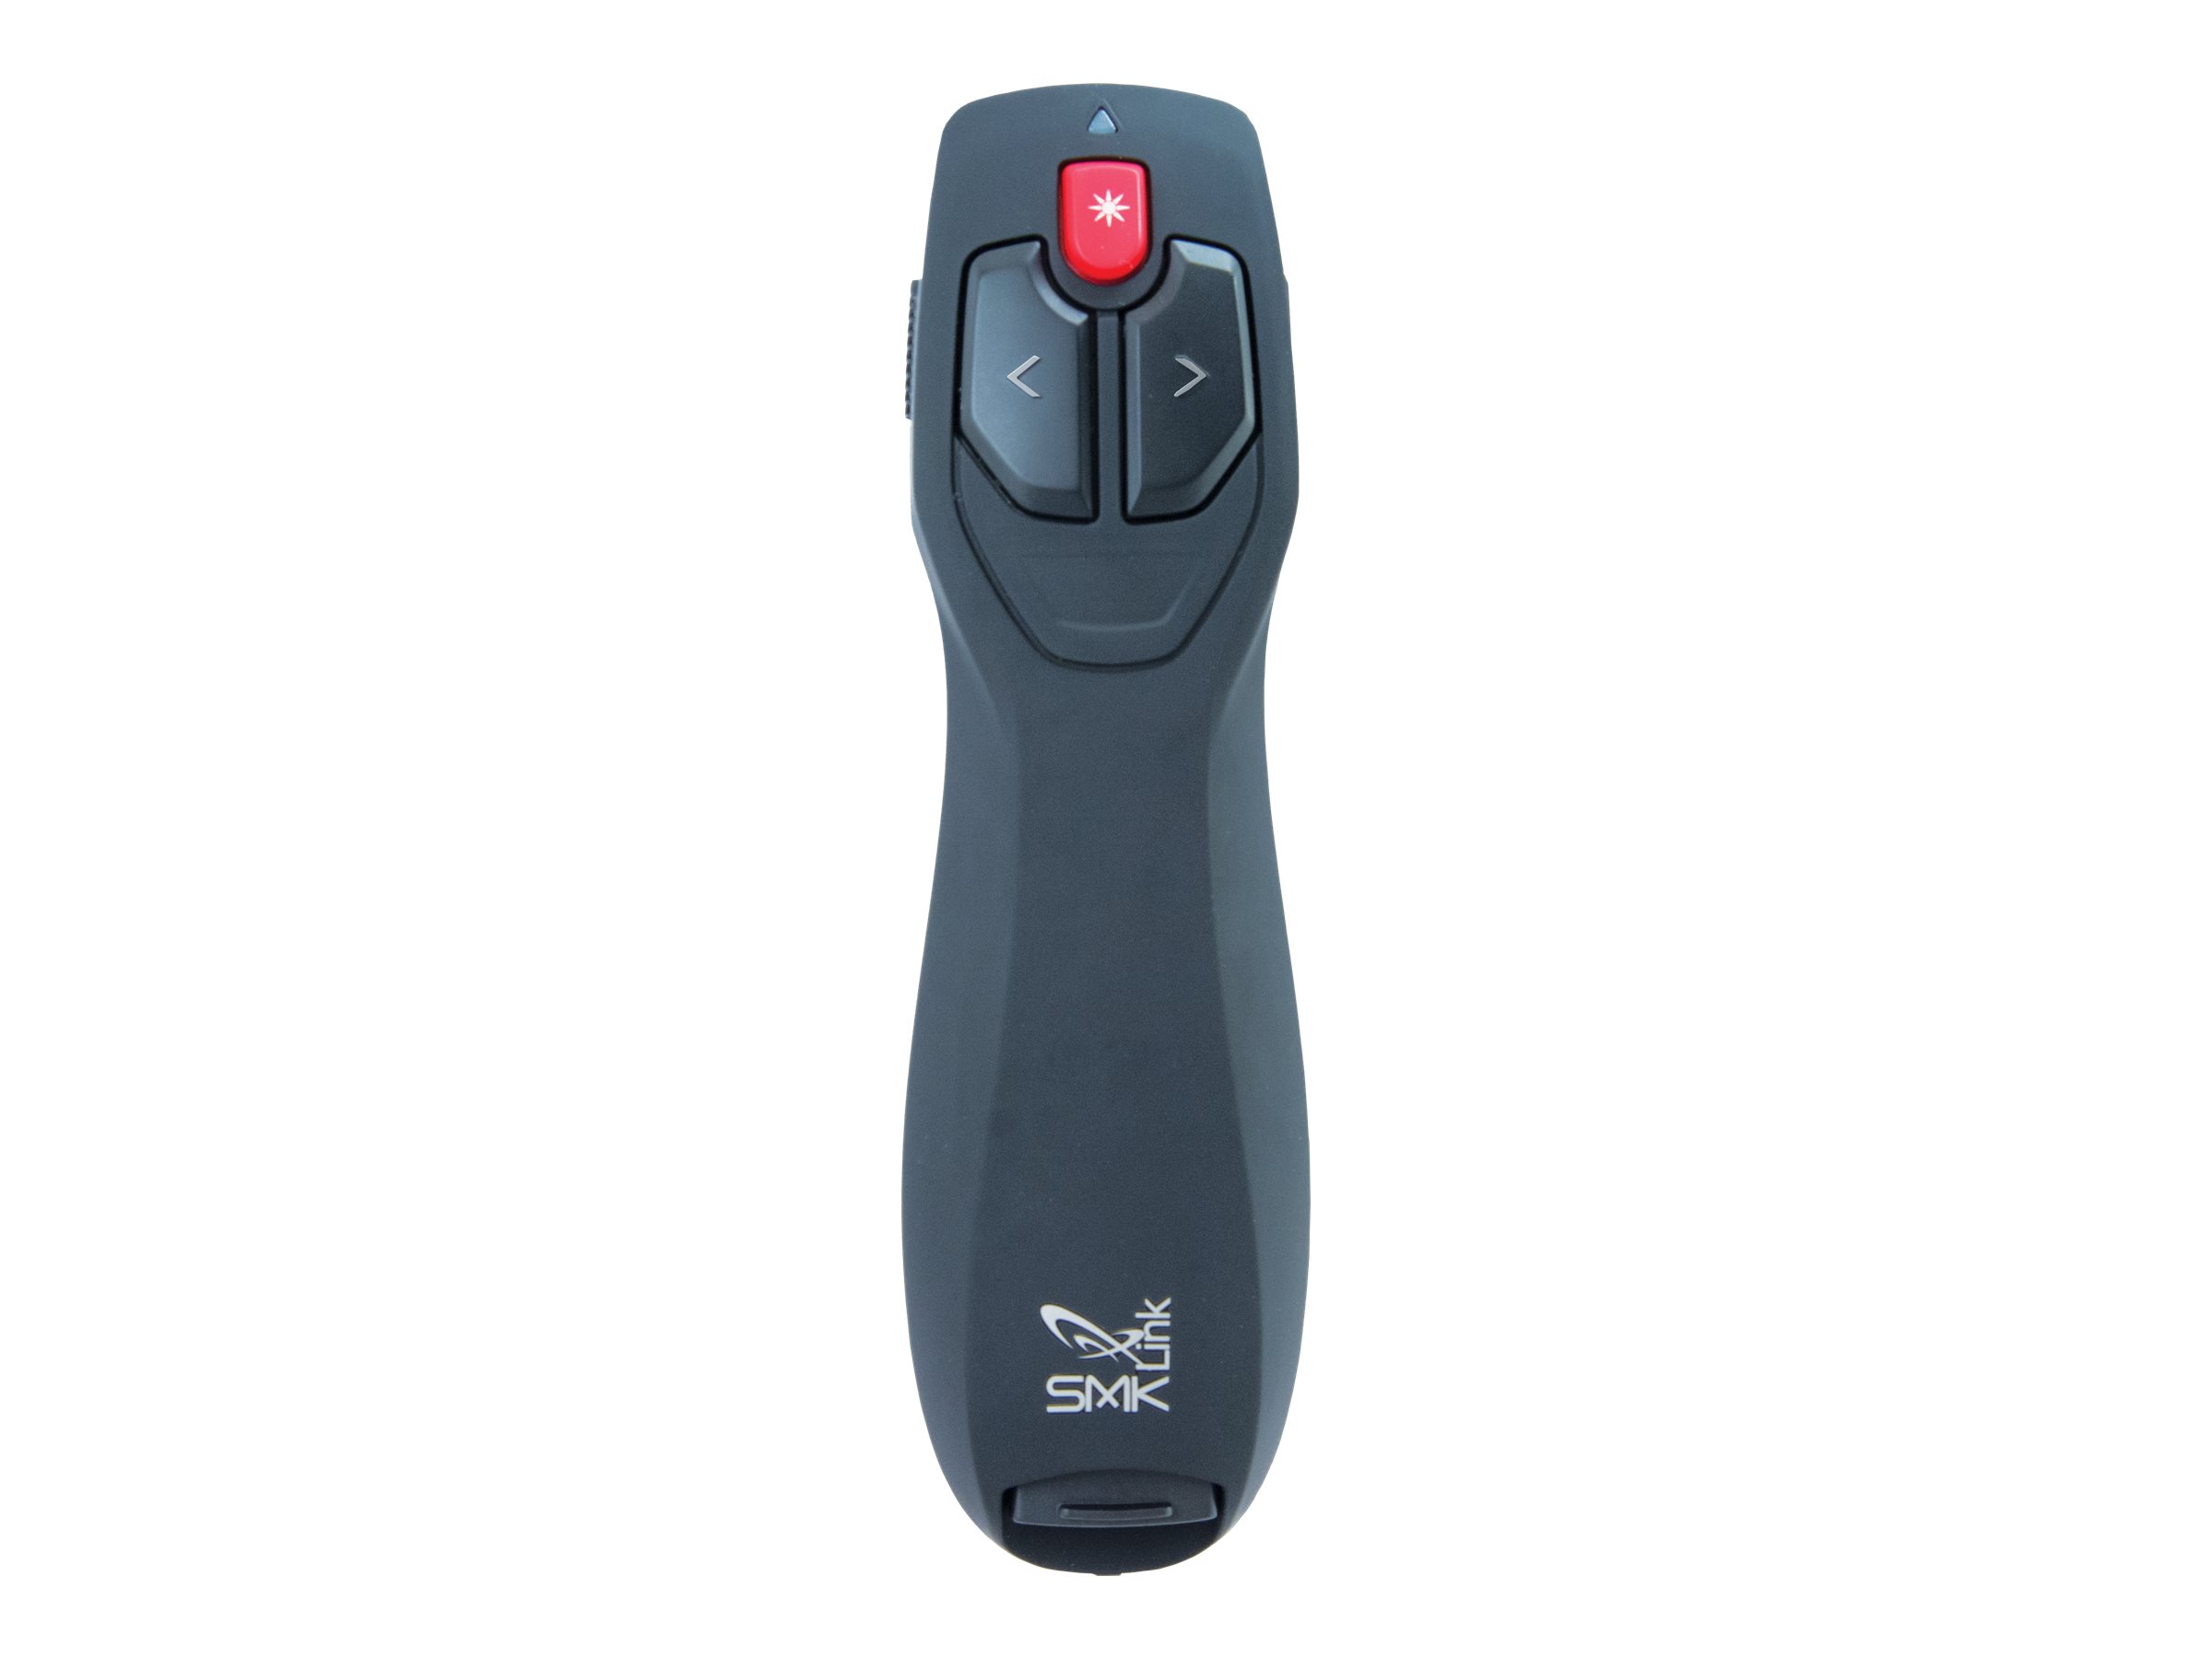 SMK-Link RemotePoint Ruby Pro Wireless Presenter Remote with Red Laser Pointer (VP4592)